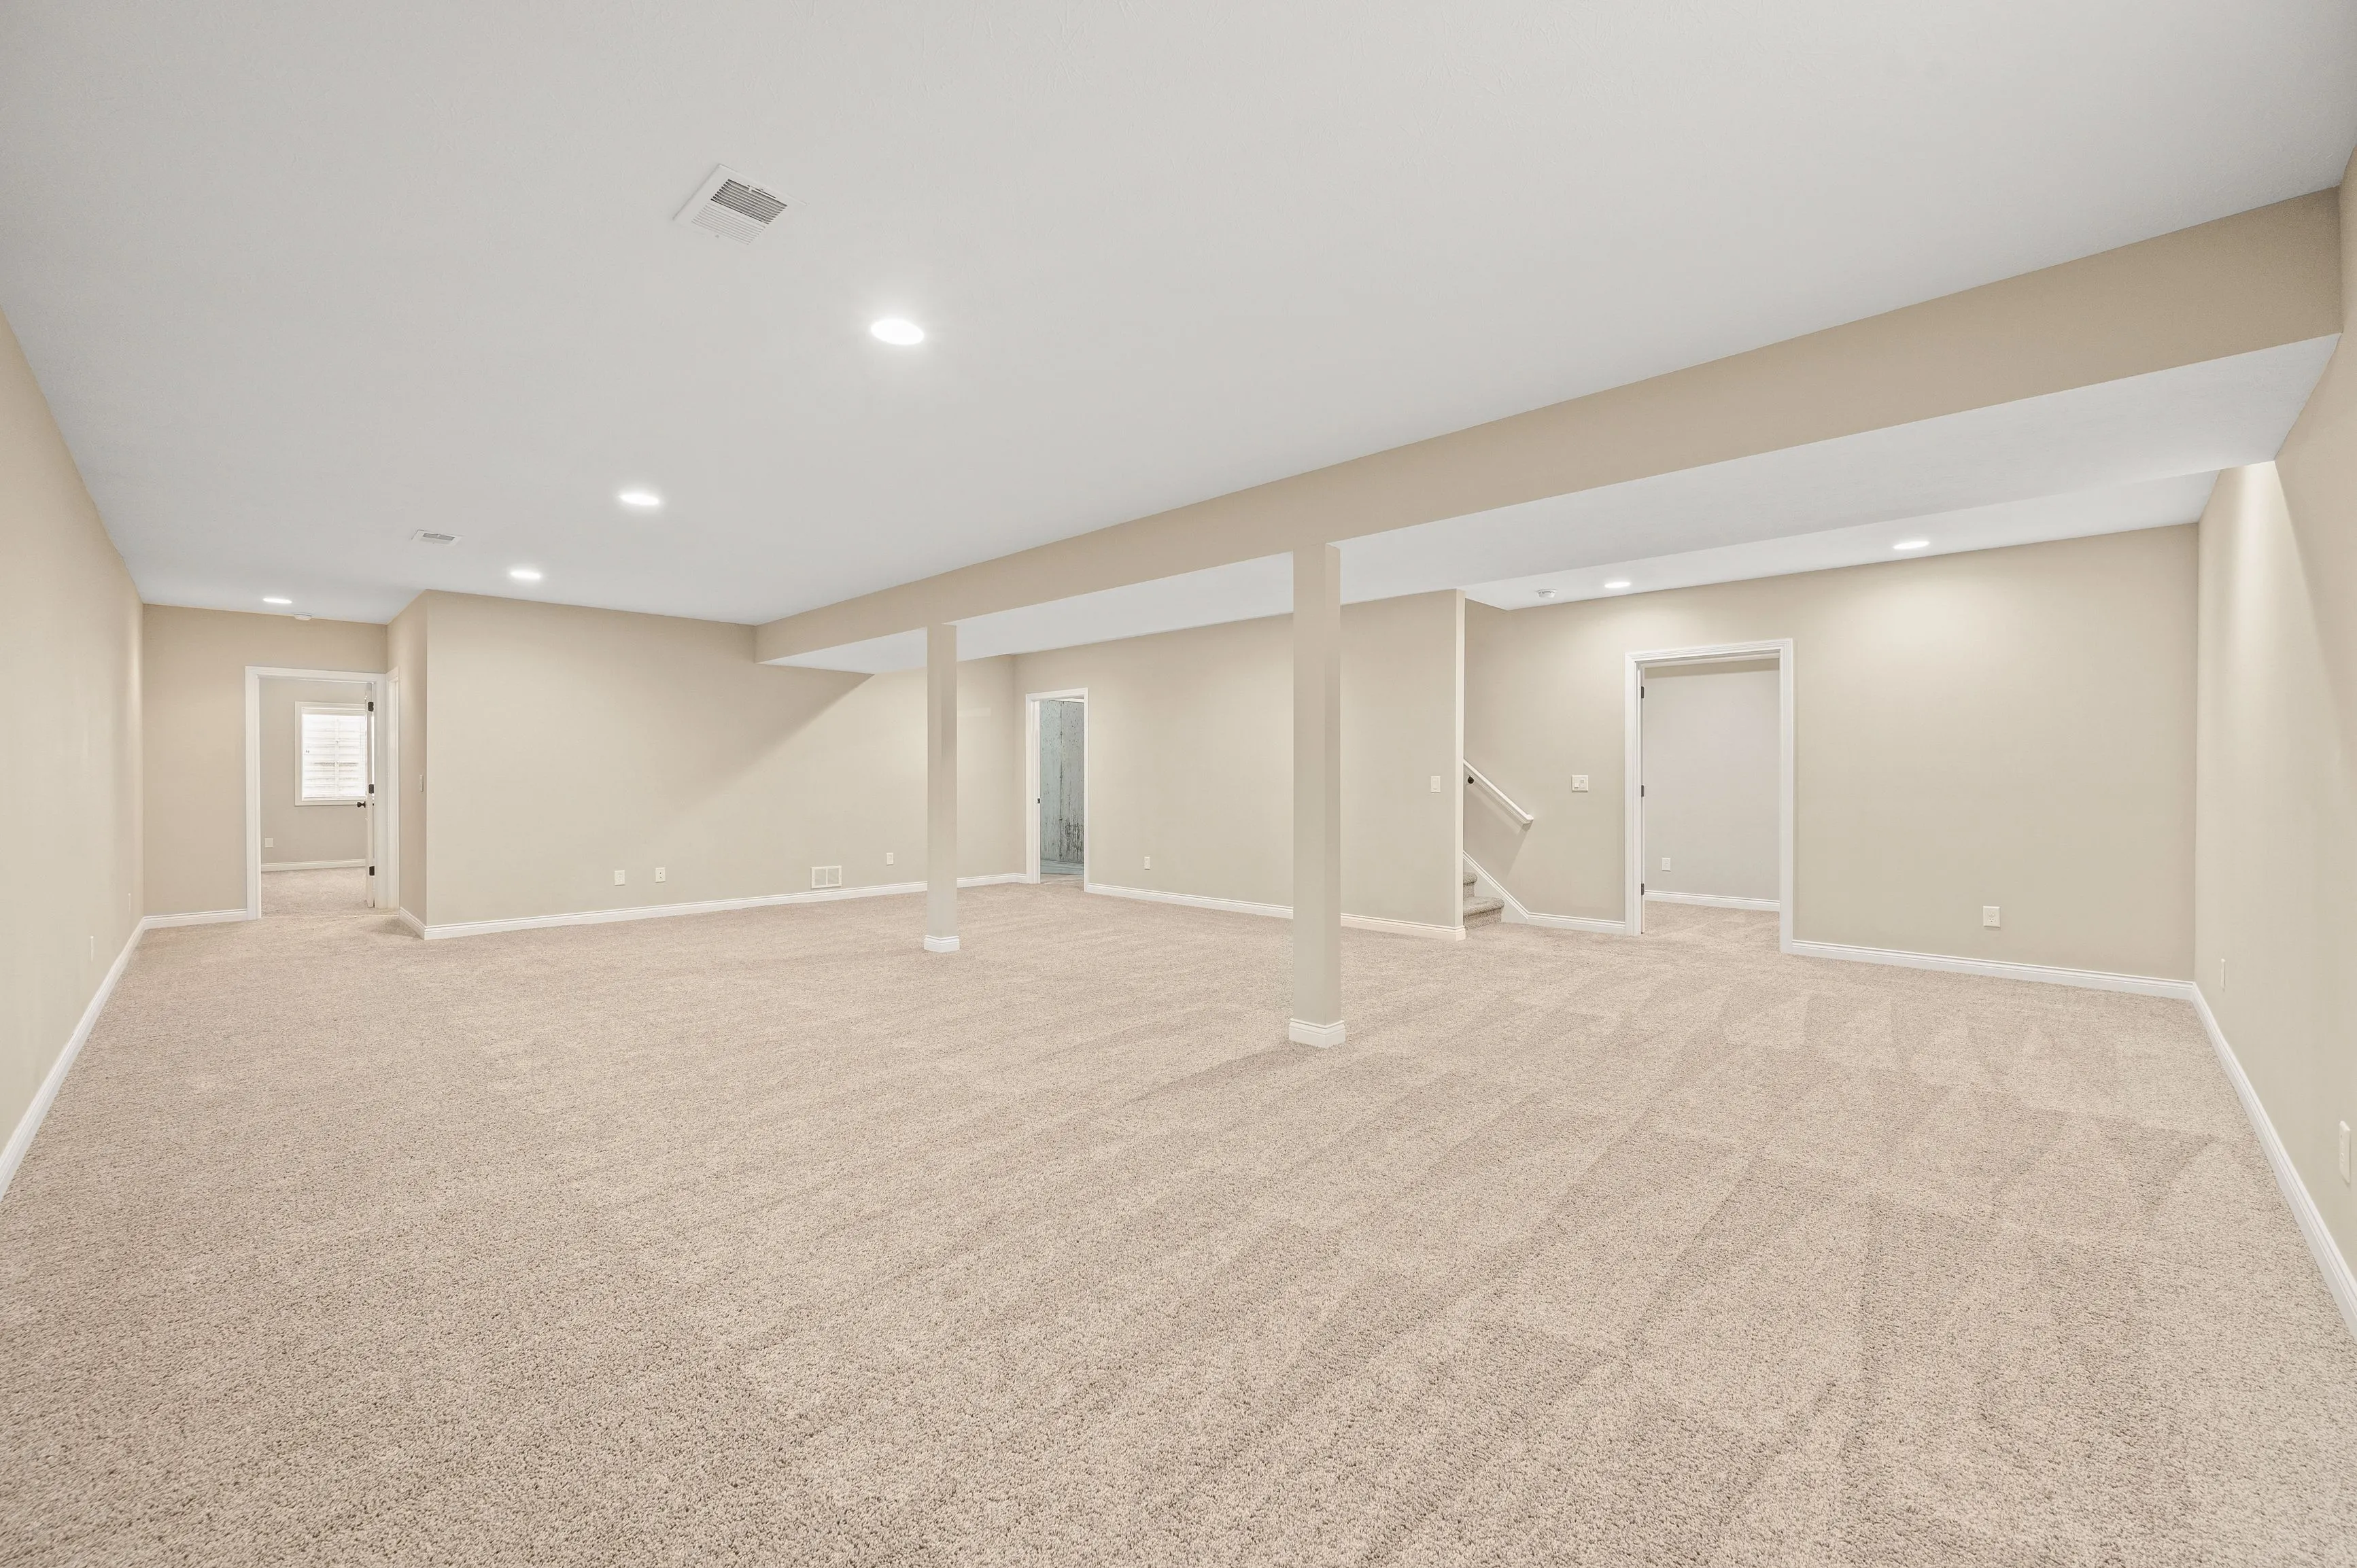 Spacious empty basement room with carpeted floors and recessed lighting.